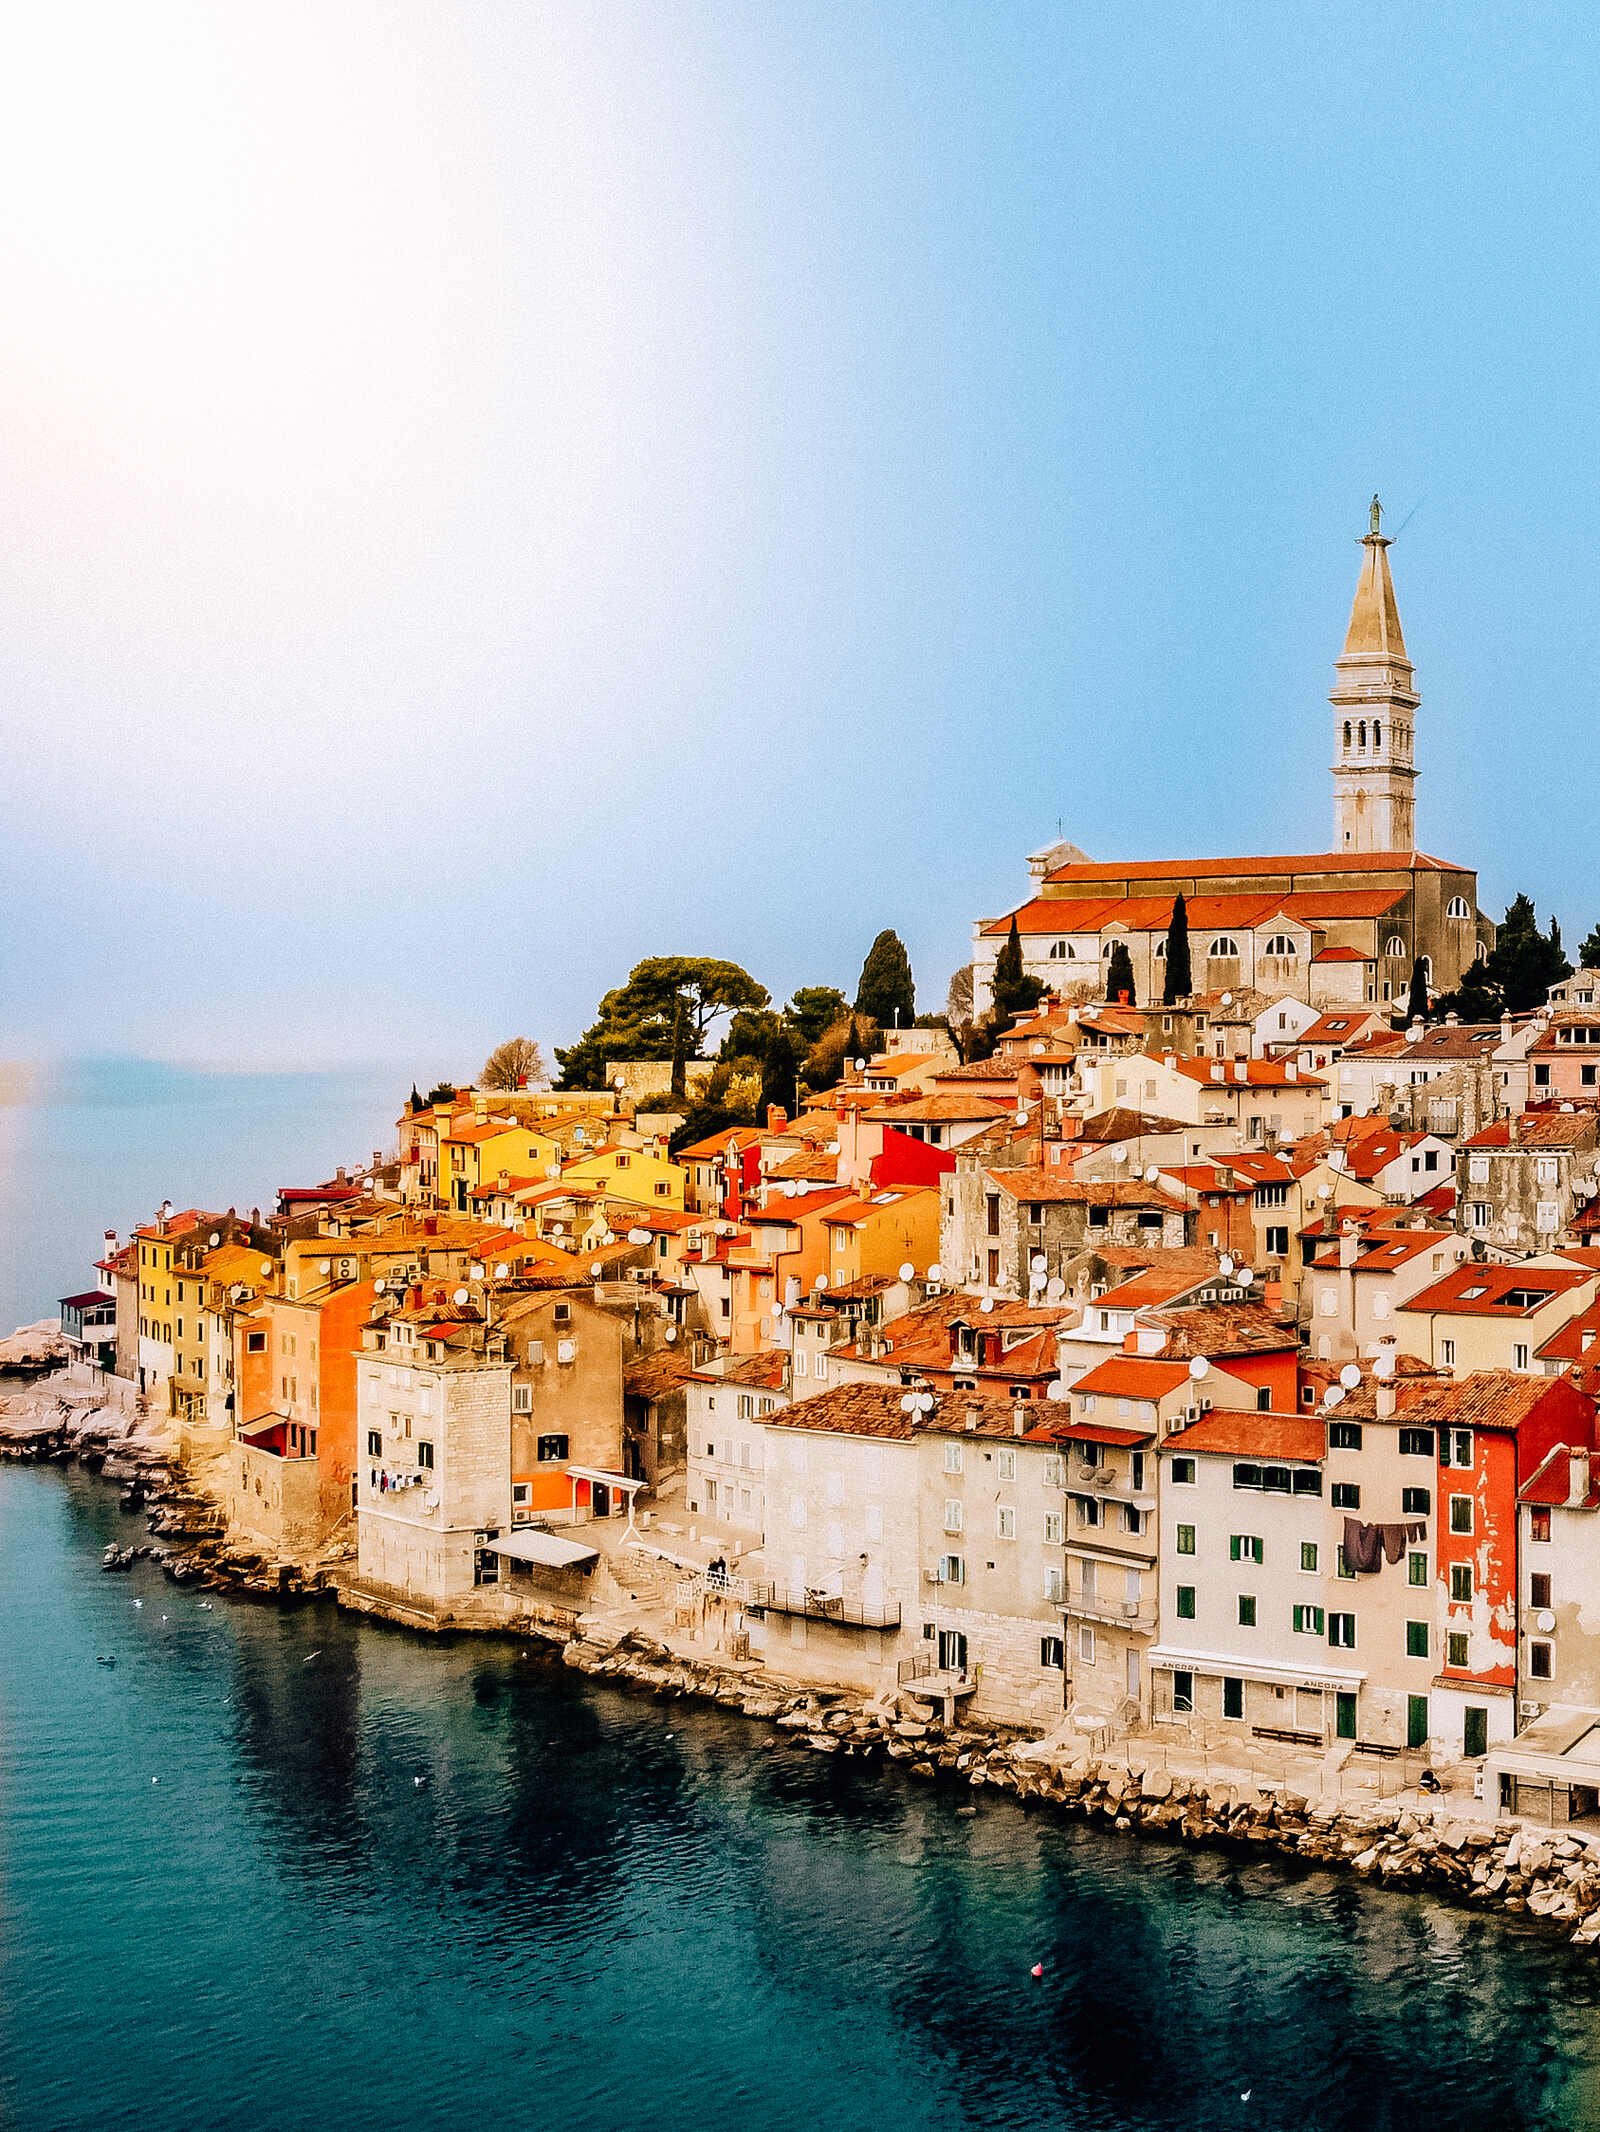 a colourful old town on a rocky peninsula surrounded by the sea in Croatia